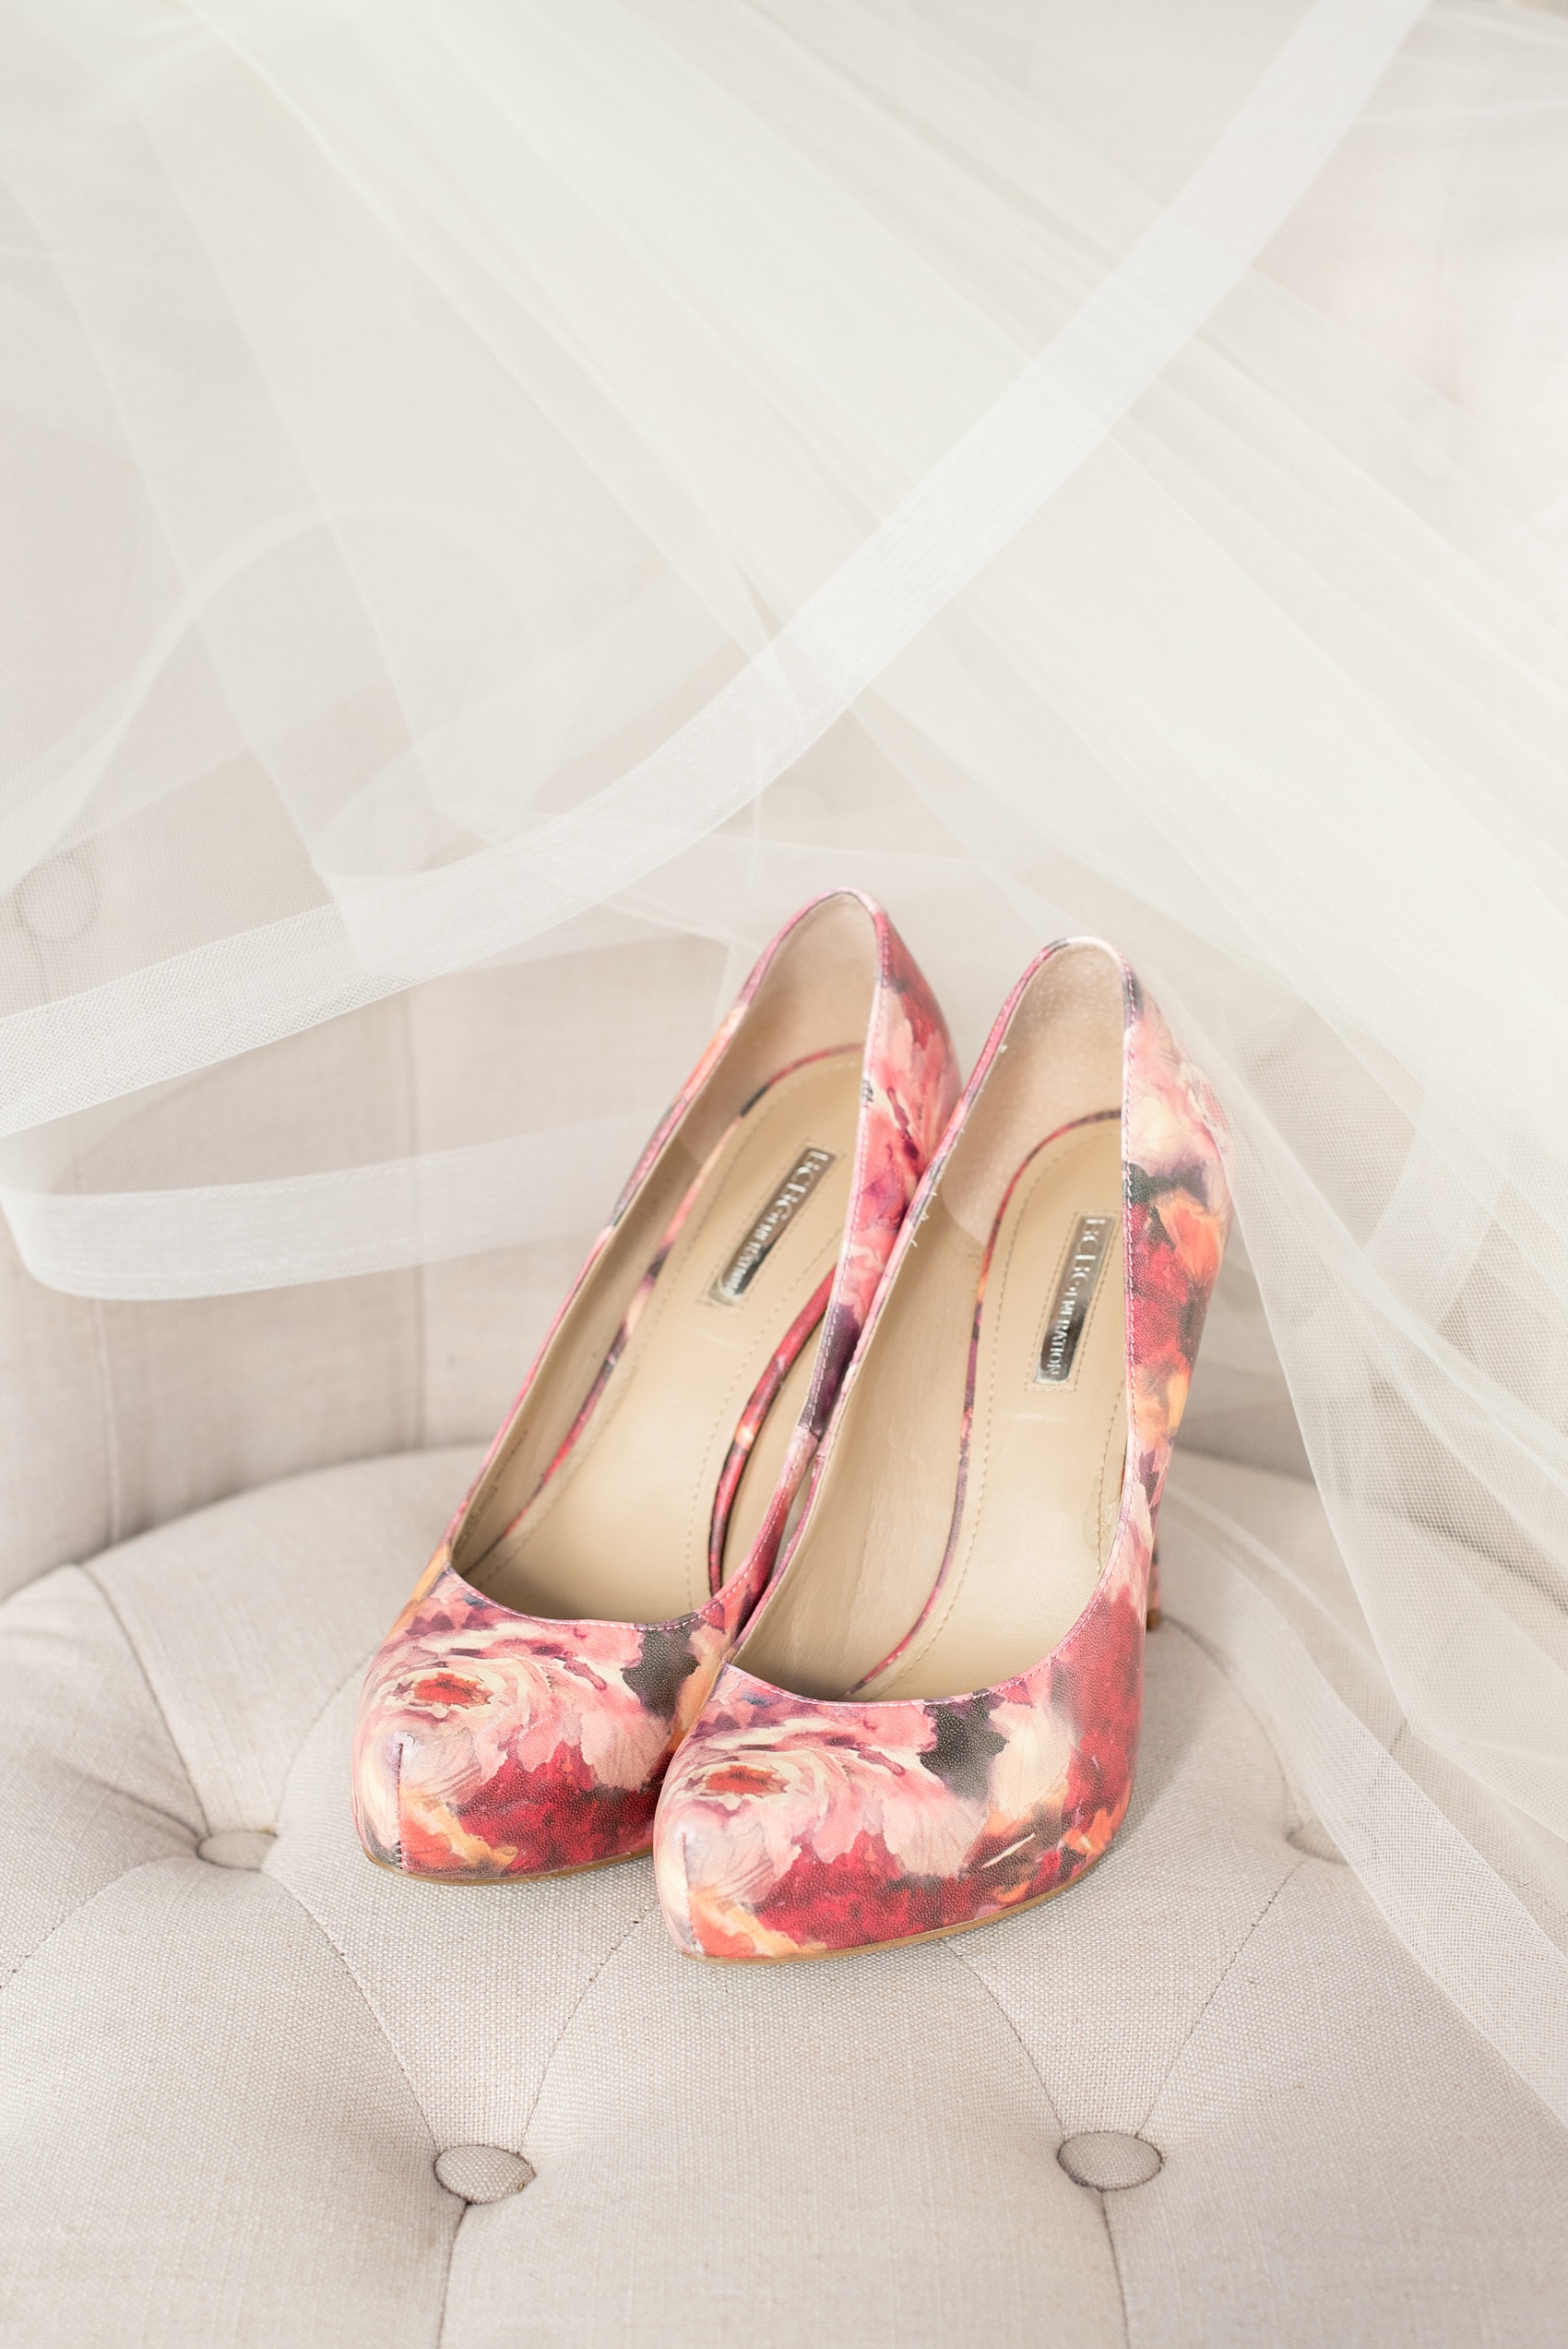 Mikkel Paige Photography photo of a wedding at The Rickhouse, Durham. This image of the bride's shoes and veil show her unique personality - pink and red floral pattern heels for the day!